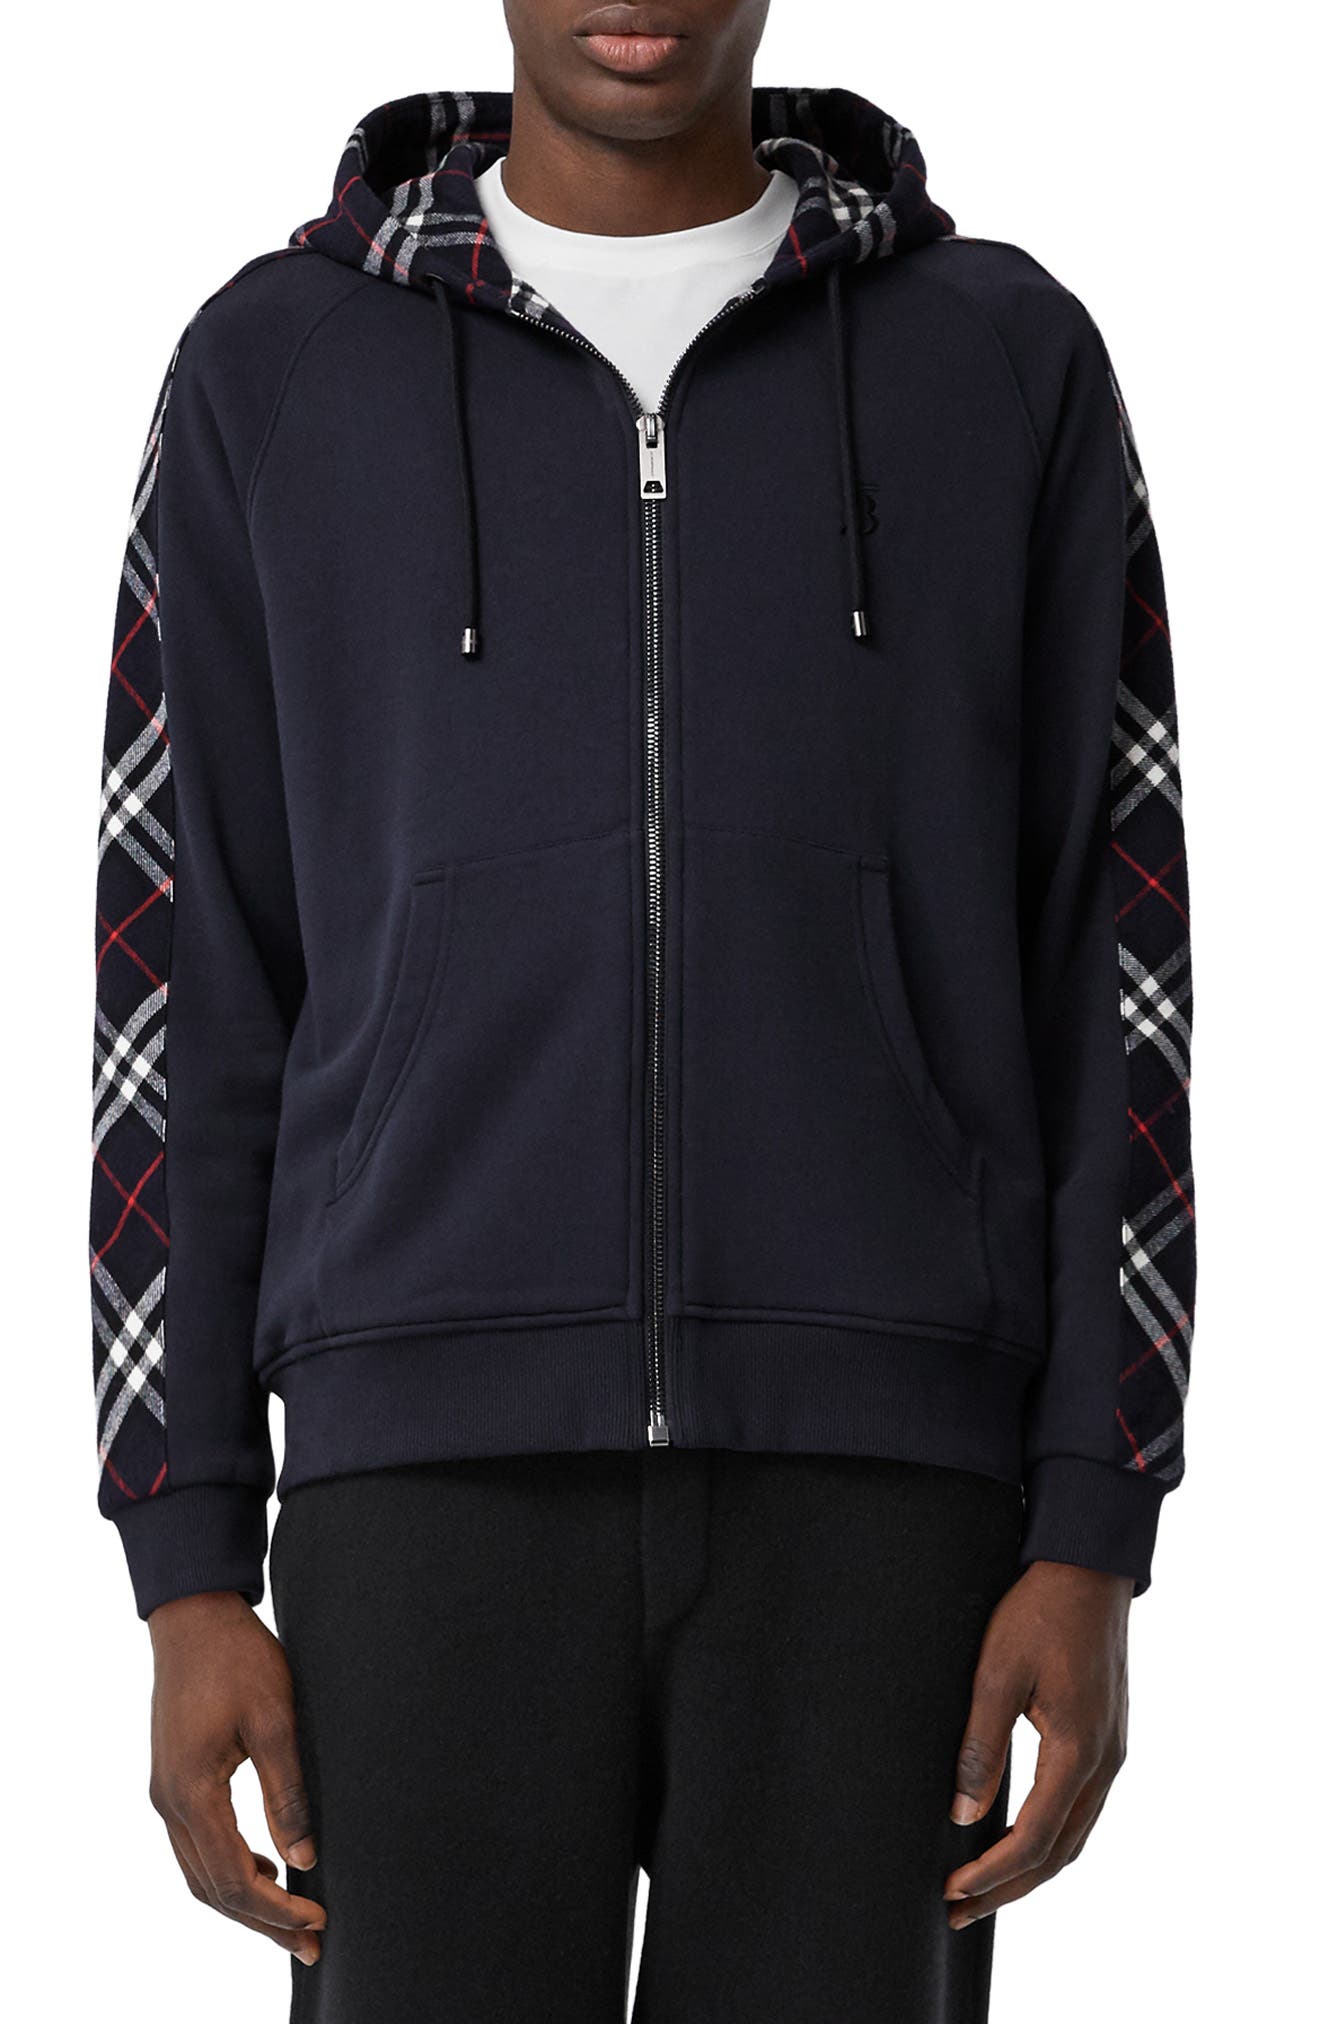 burberry fordson hoodie